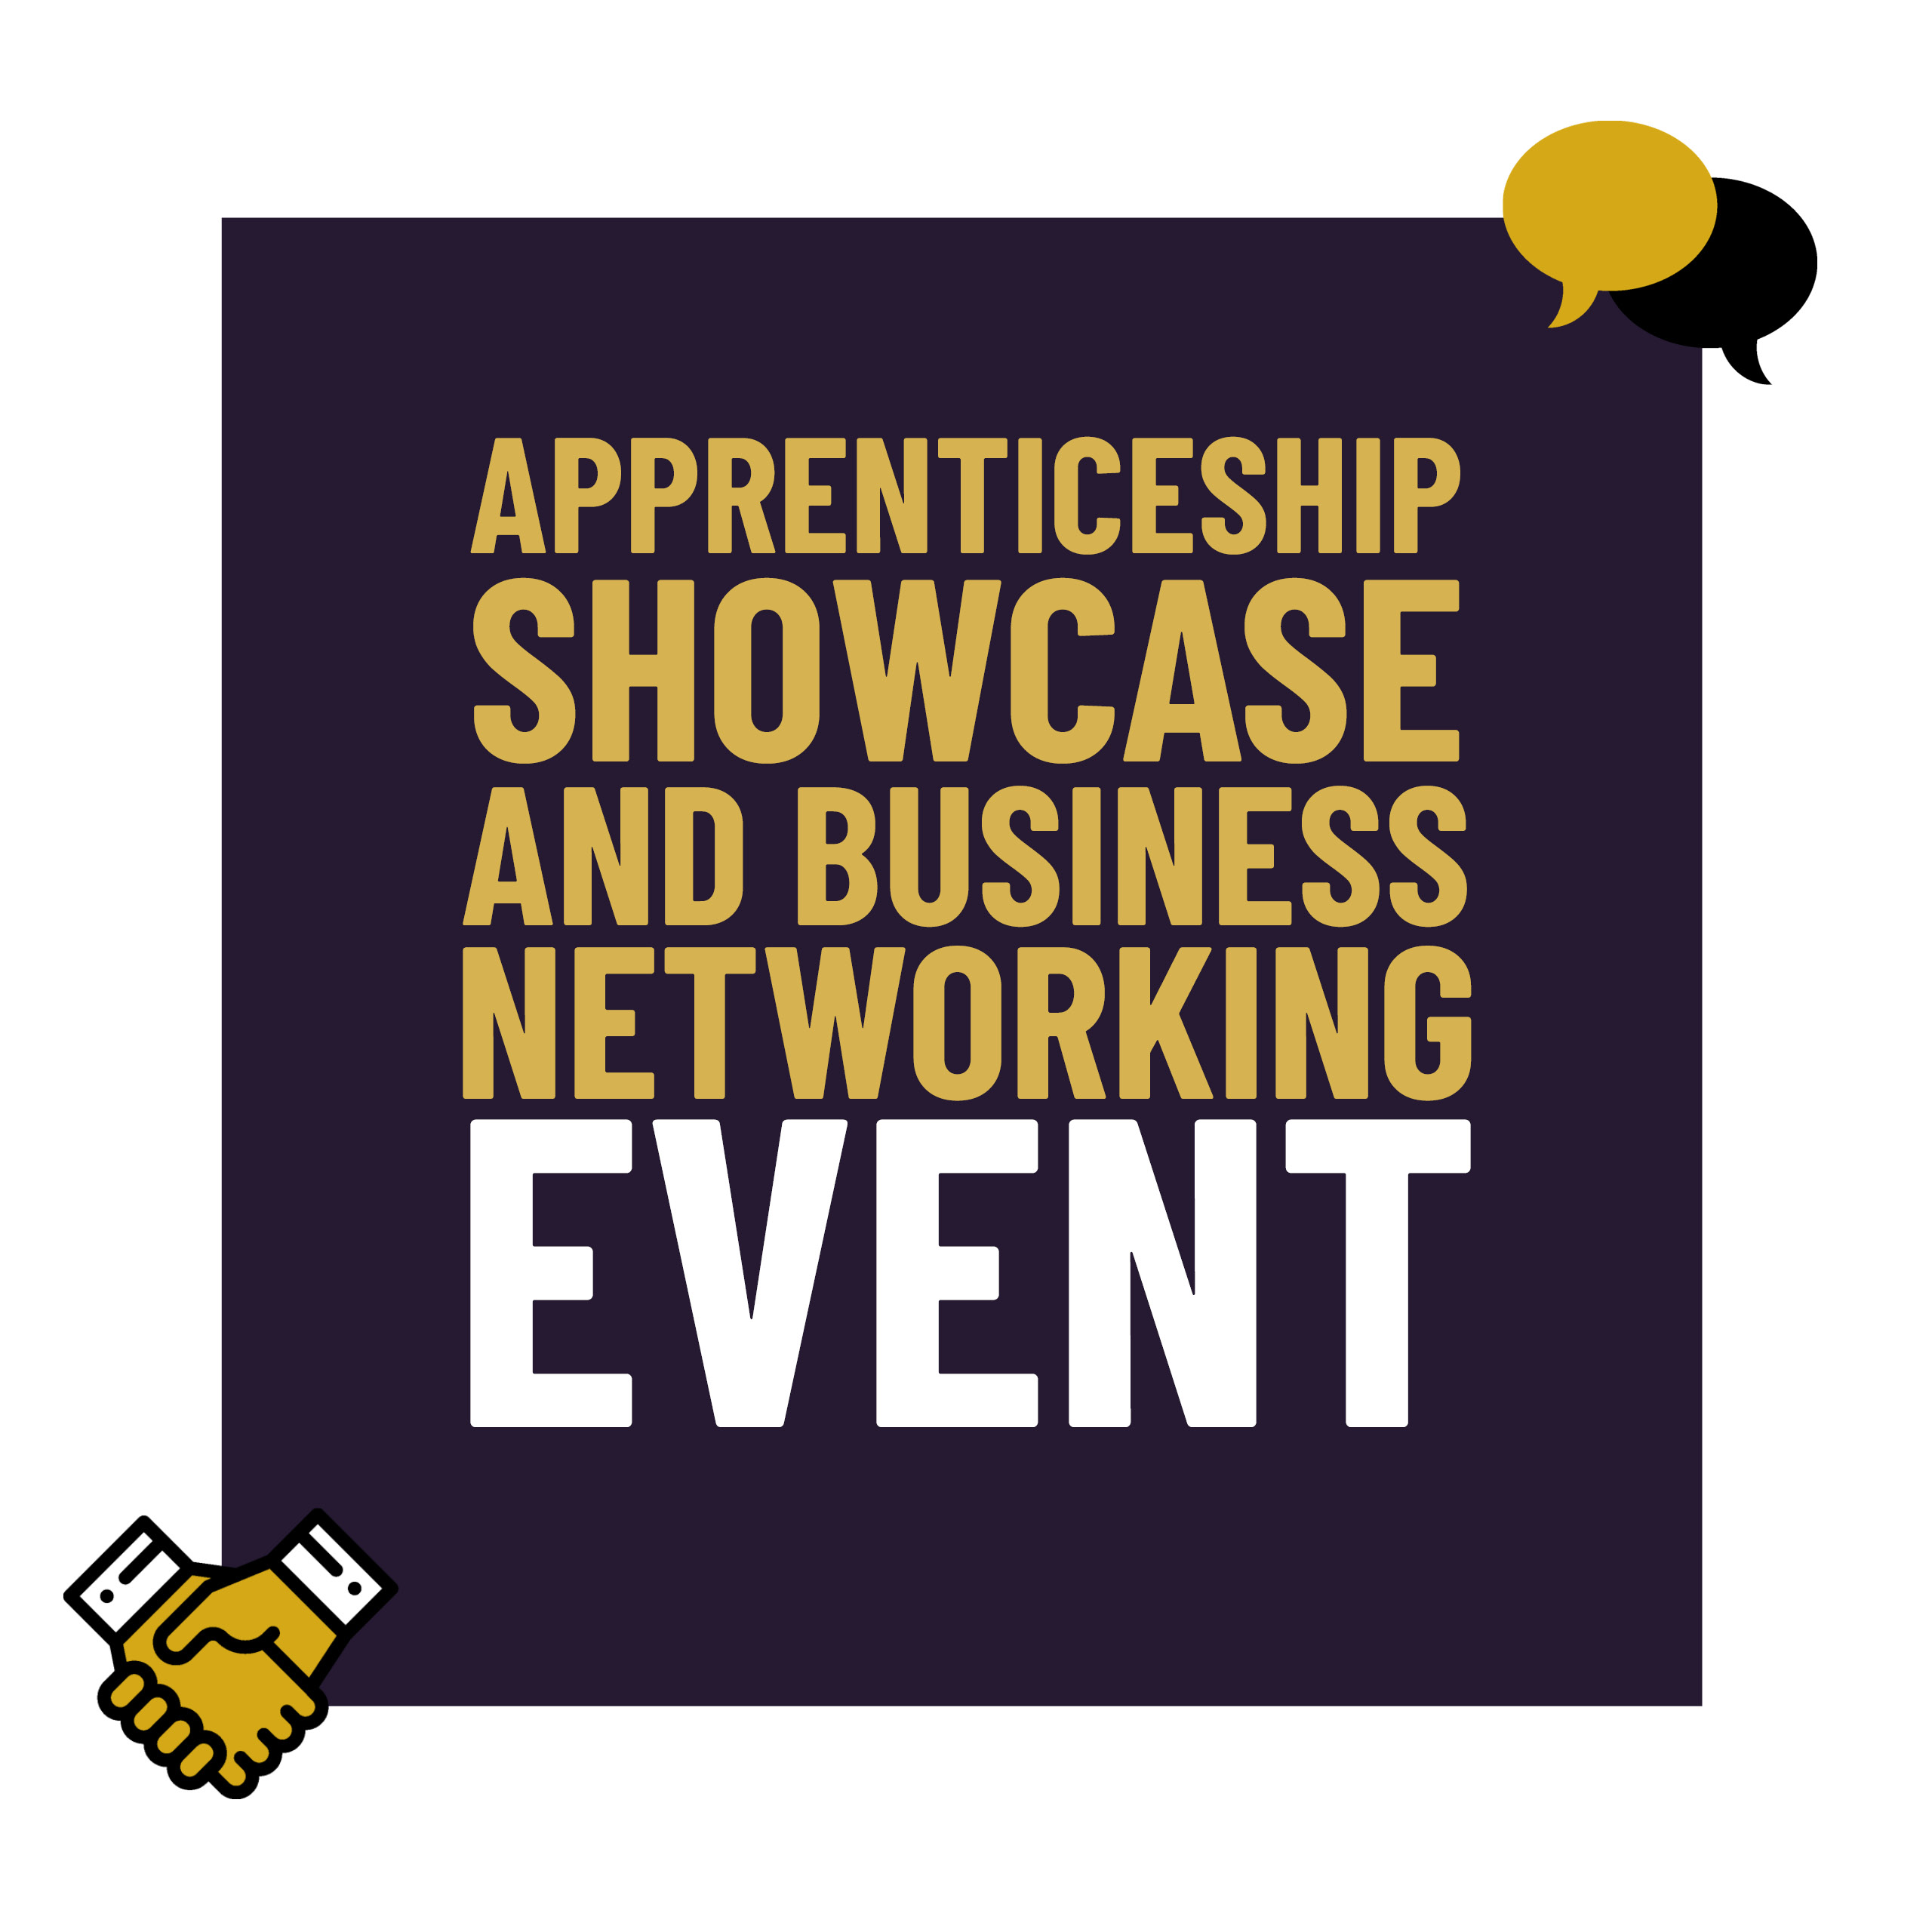 "Apprenticeship Showcase and Business Networking Event"